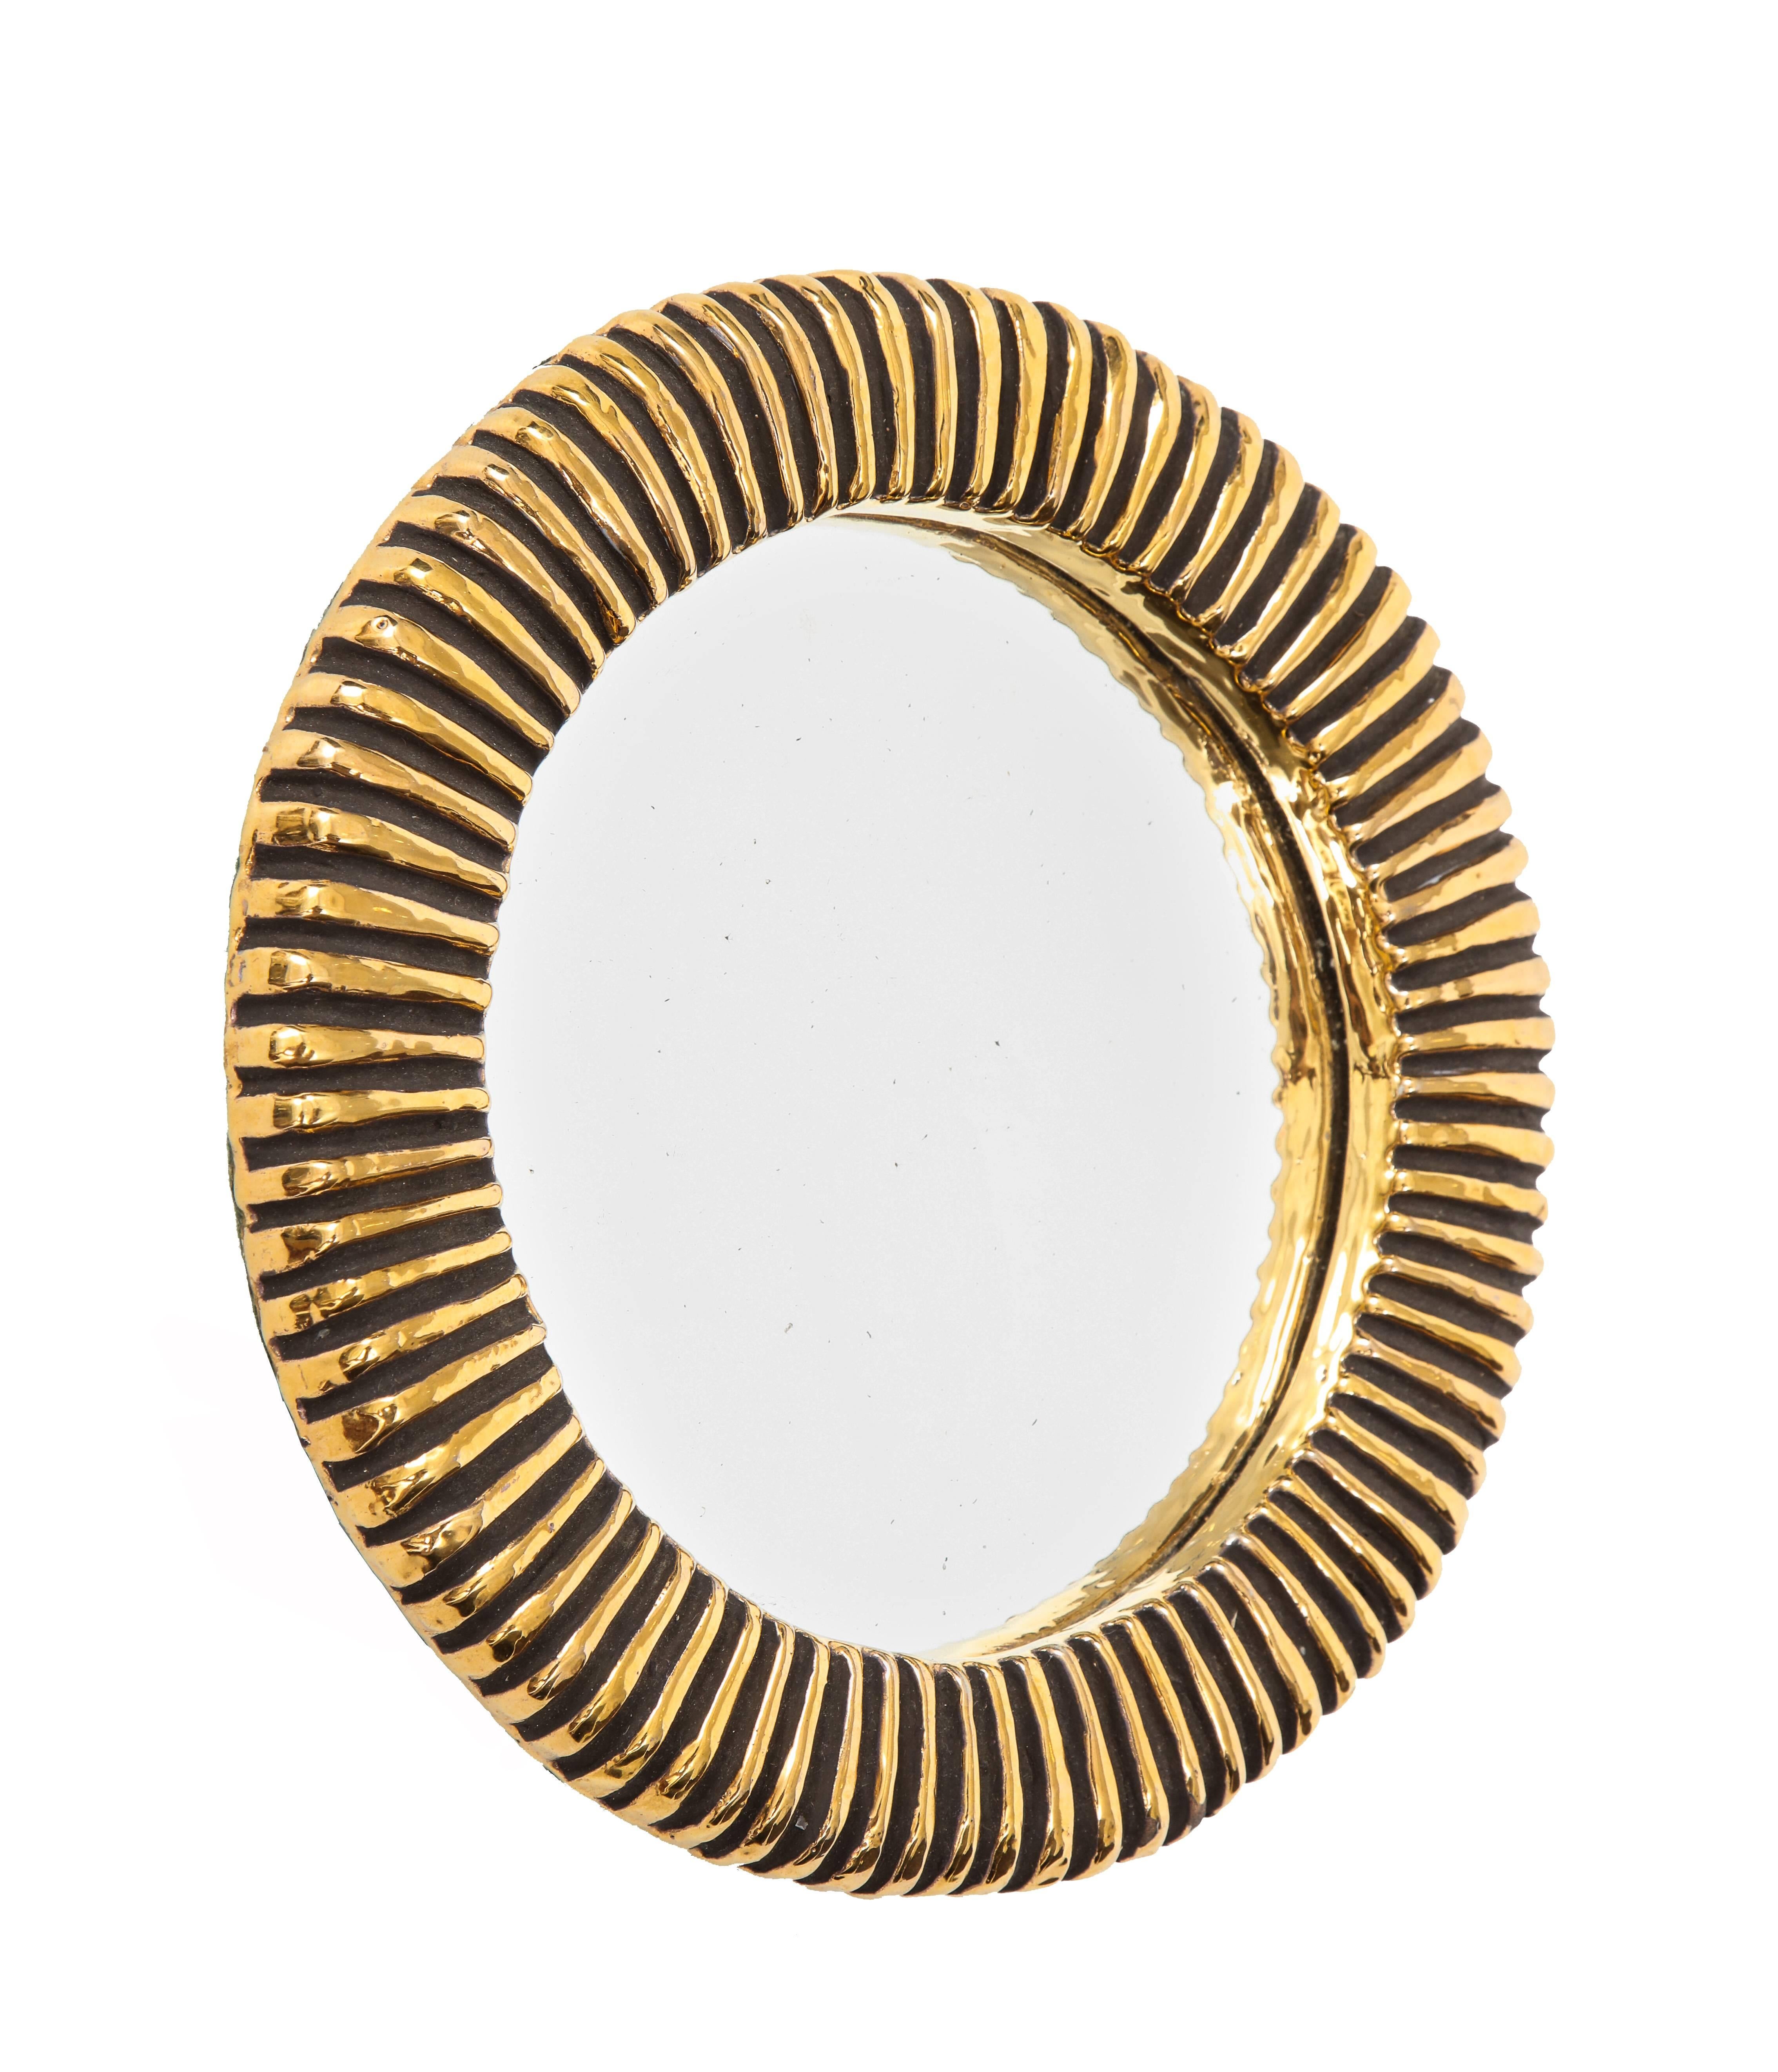 Francois Lembo ceramic mirror gold ribbed, France, 1970s. Petite mirror with ribbed pattern and gold glaze. Felt on verso.
A native of Vallauris François Lembo started his pottery career in 1951 in the workshops of Calva and Rossignol. After his